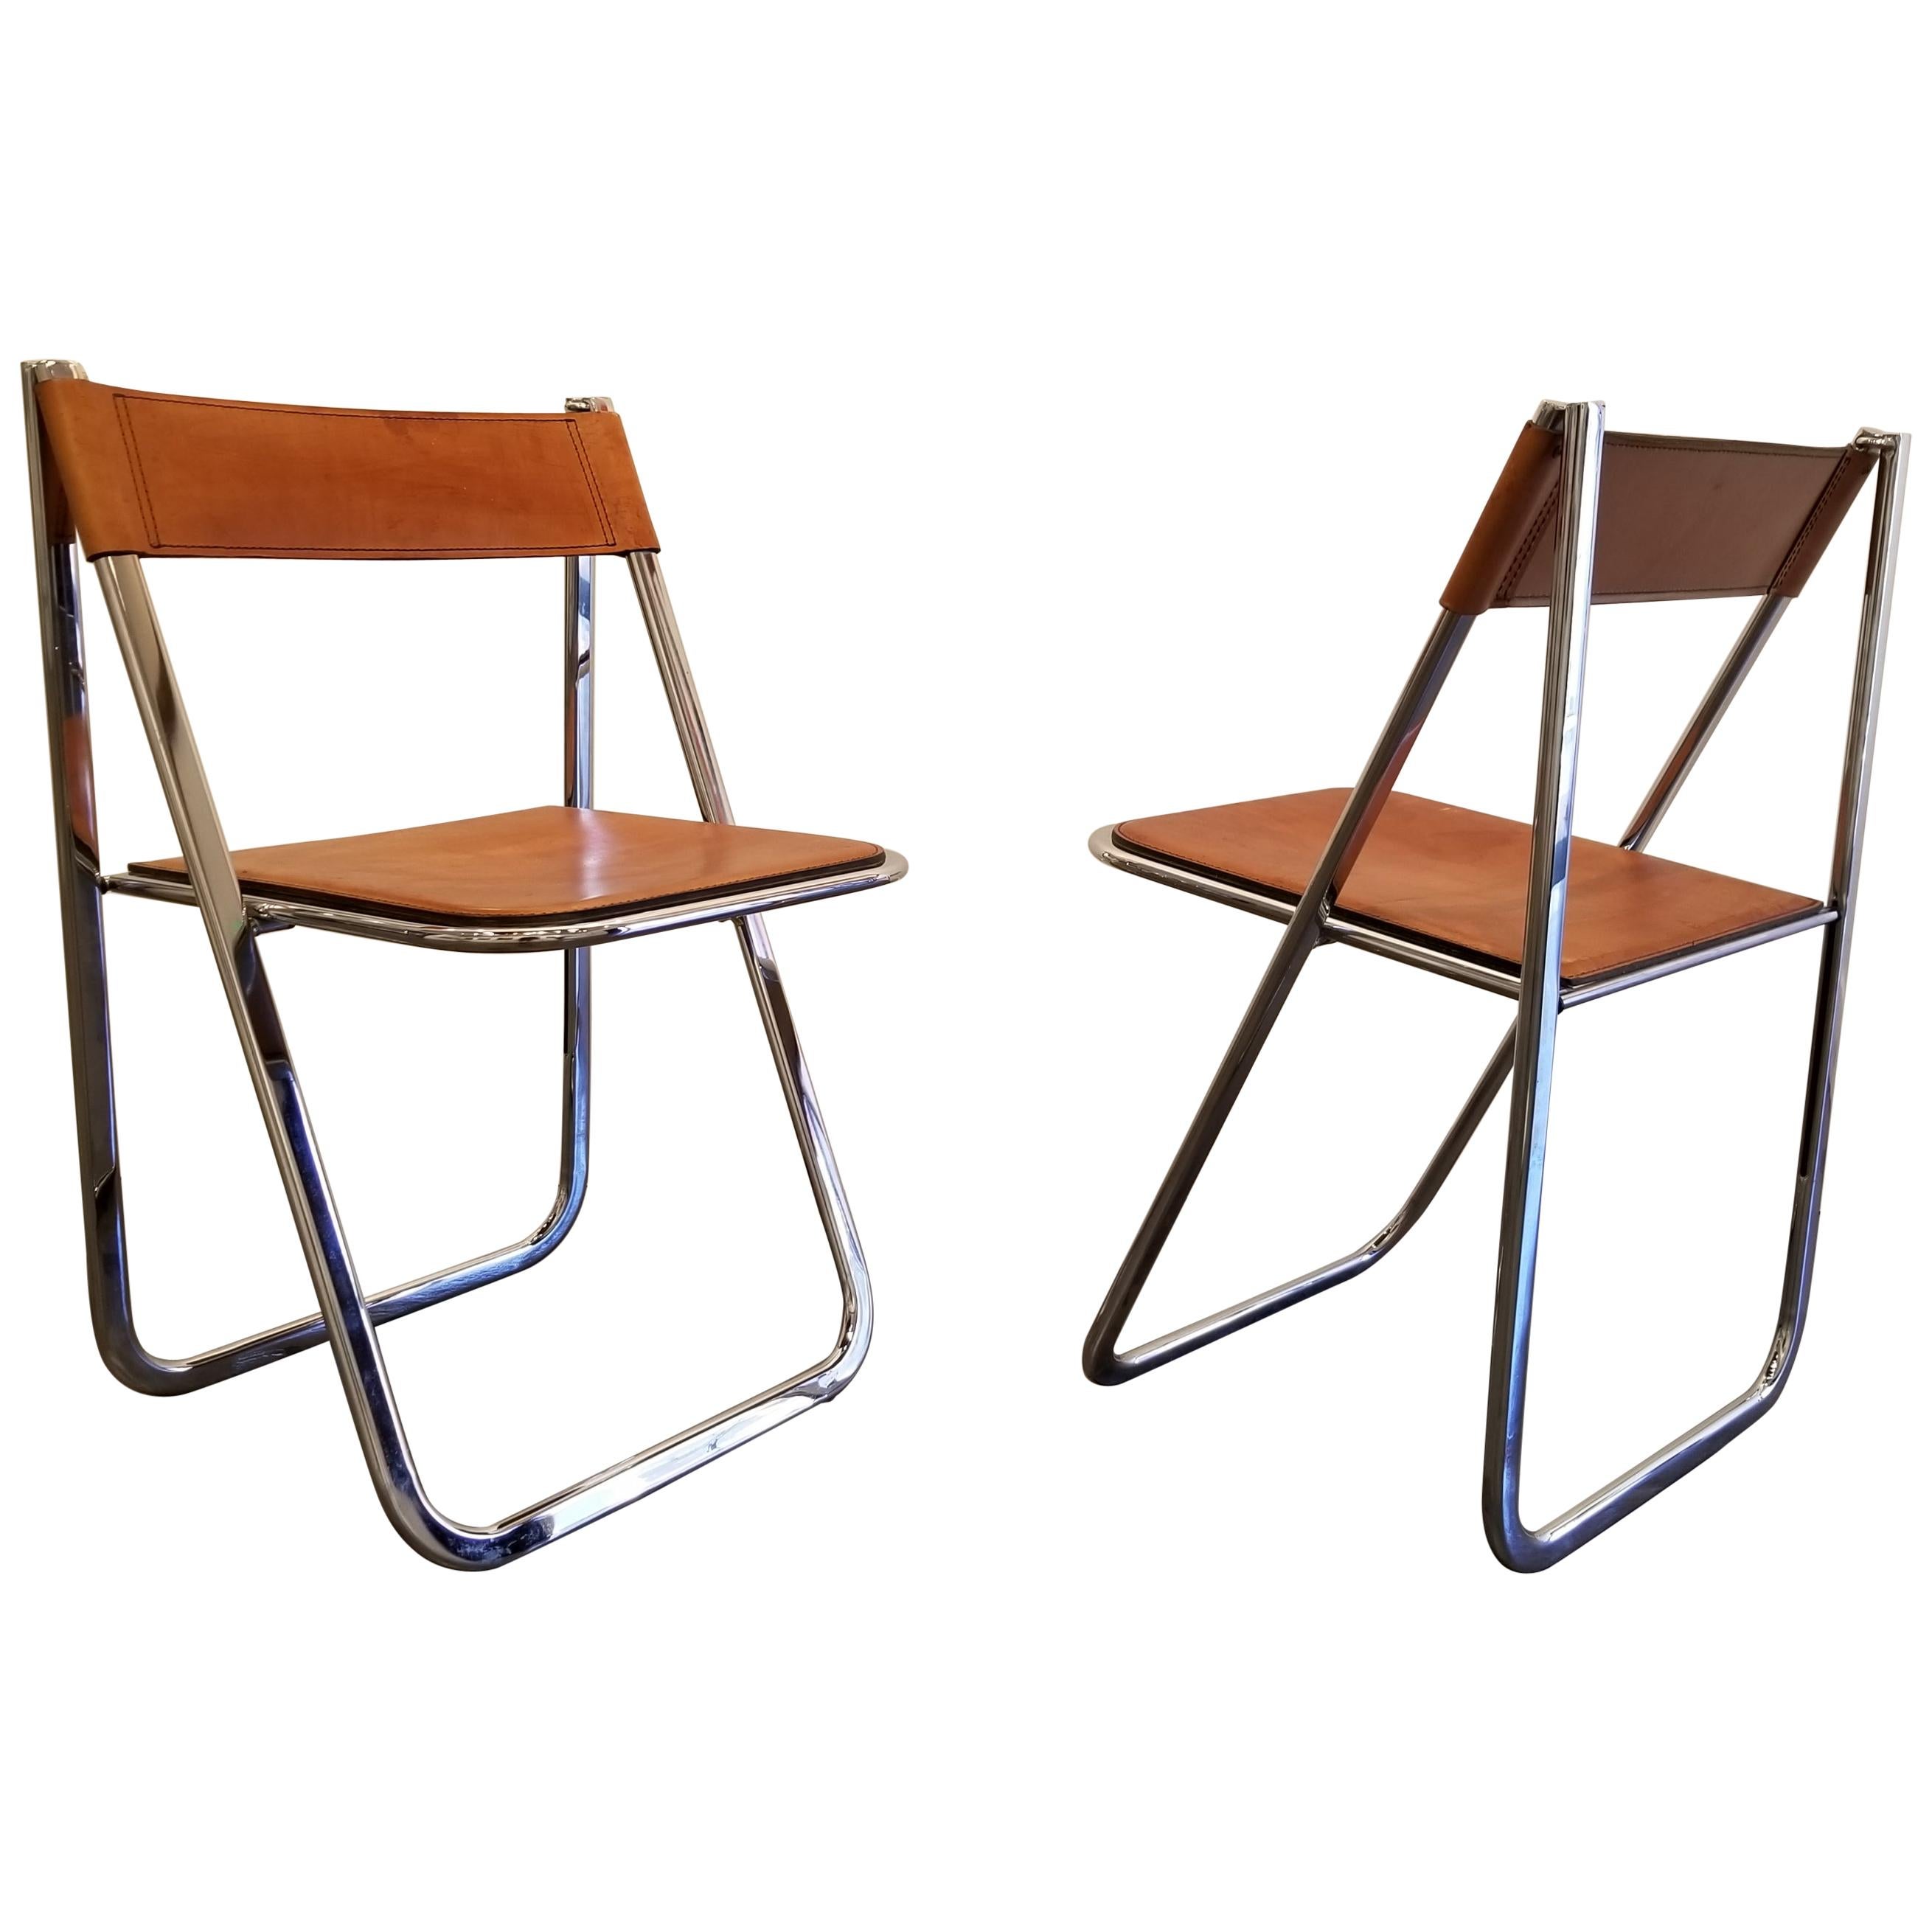 Tamara by Arrben Mid-Century Modern Chrome and Leather Folding Chairs, a Pair